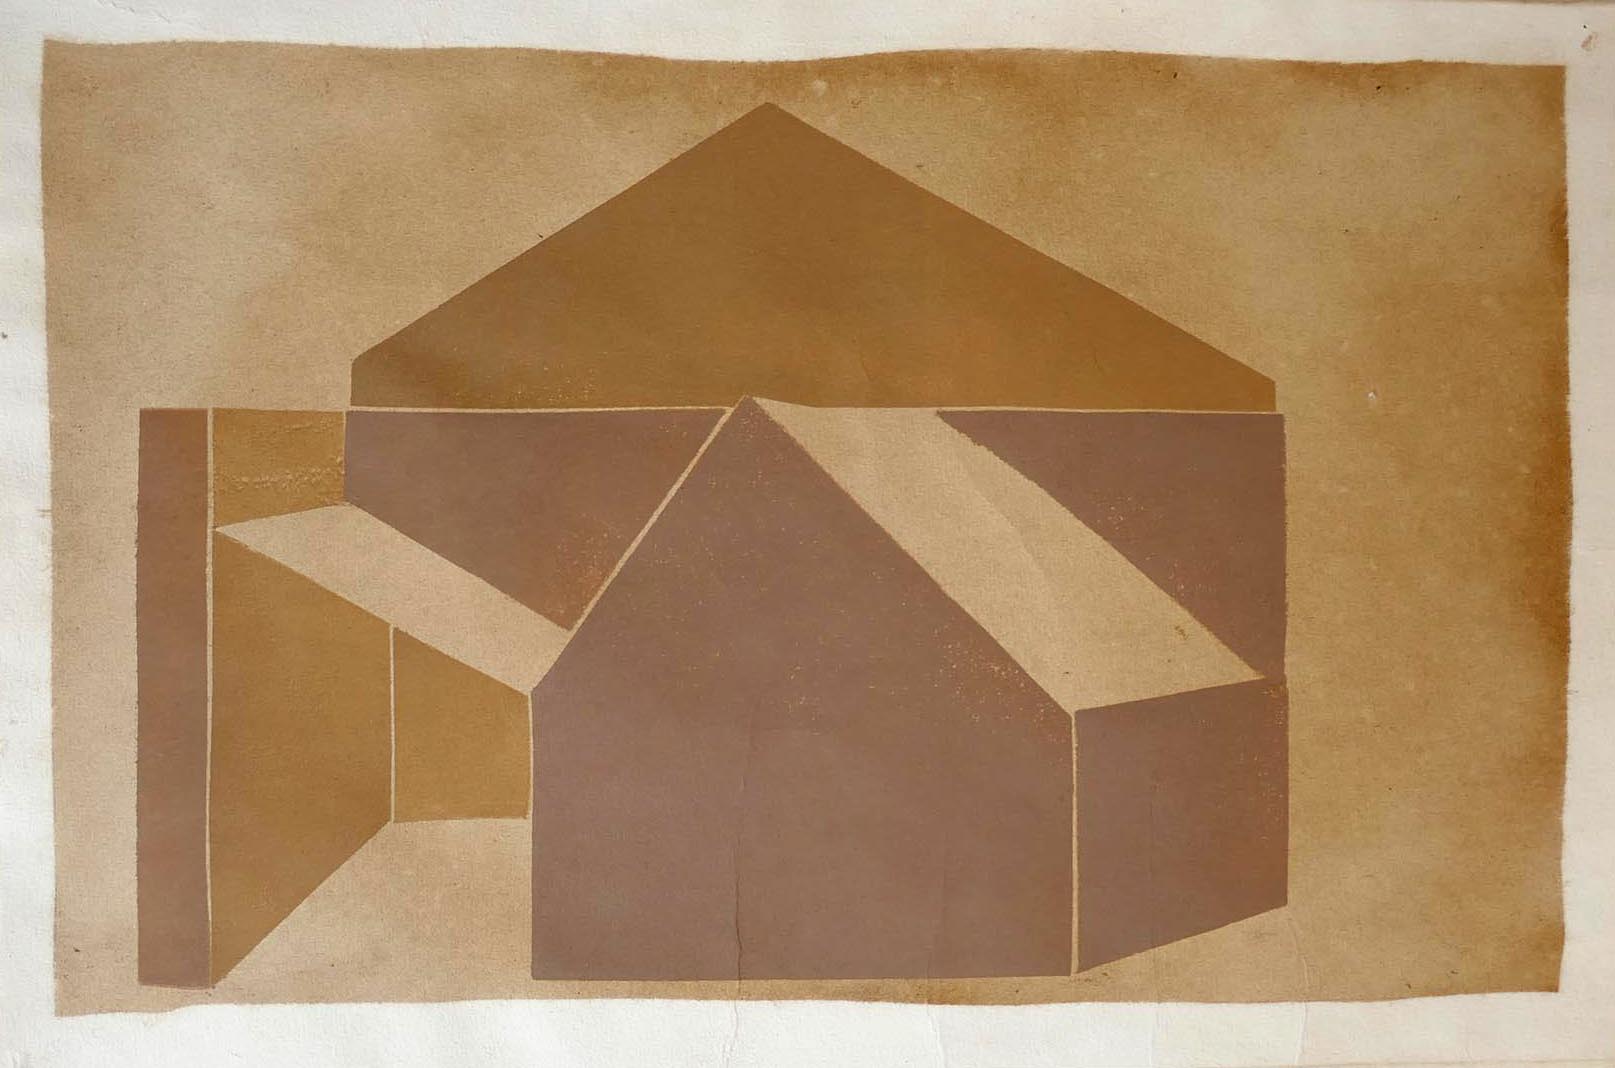 Architecture végétale 3, 2020, monotype on dyed paper (chesnuts leaves), image size 22,4x35,7 cm, paper size 26x38,7 cm, edition of 1